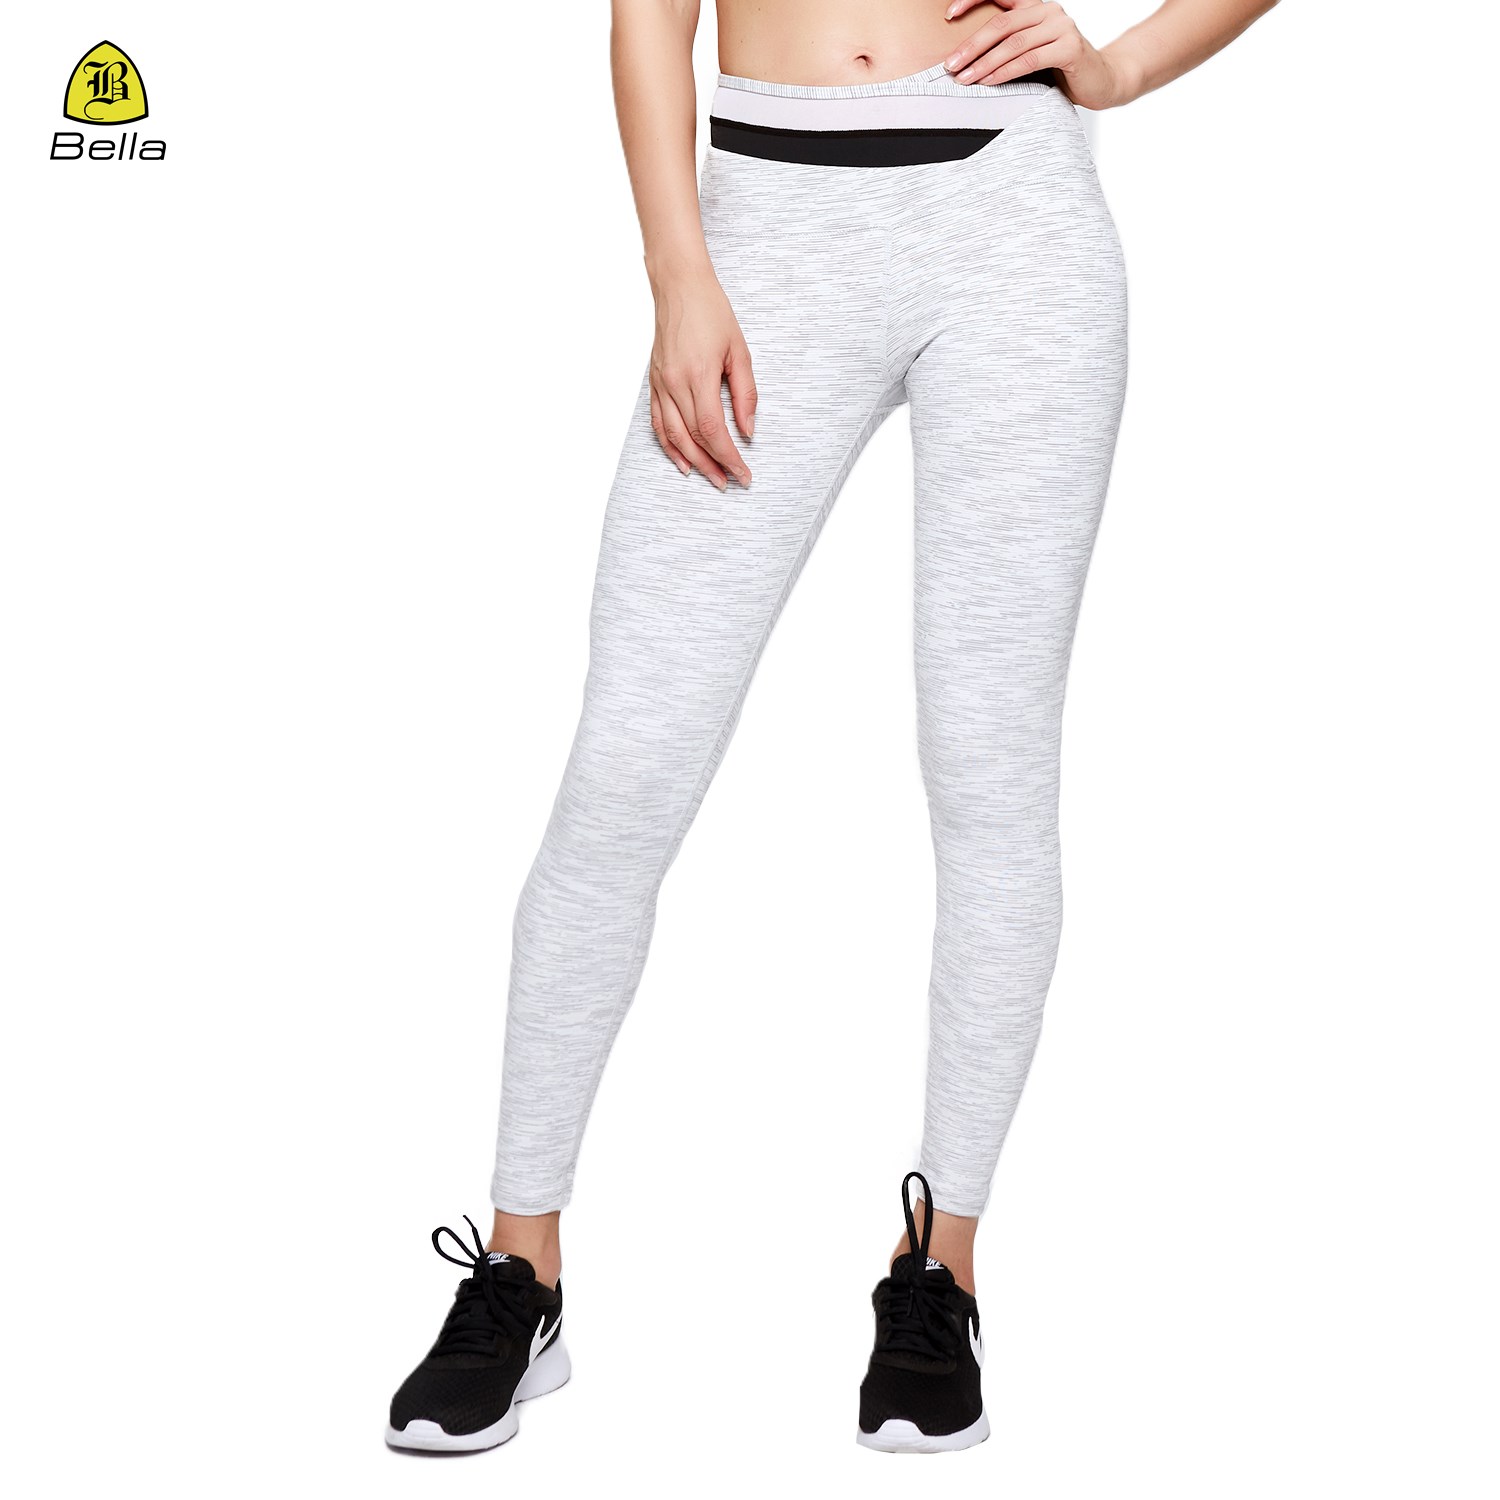 OEM soft stretch comfortable yoga tights with mesh waist